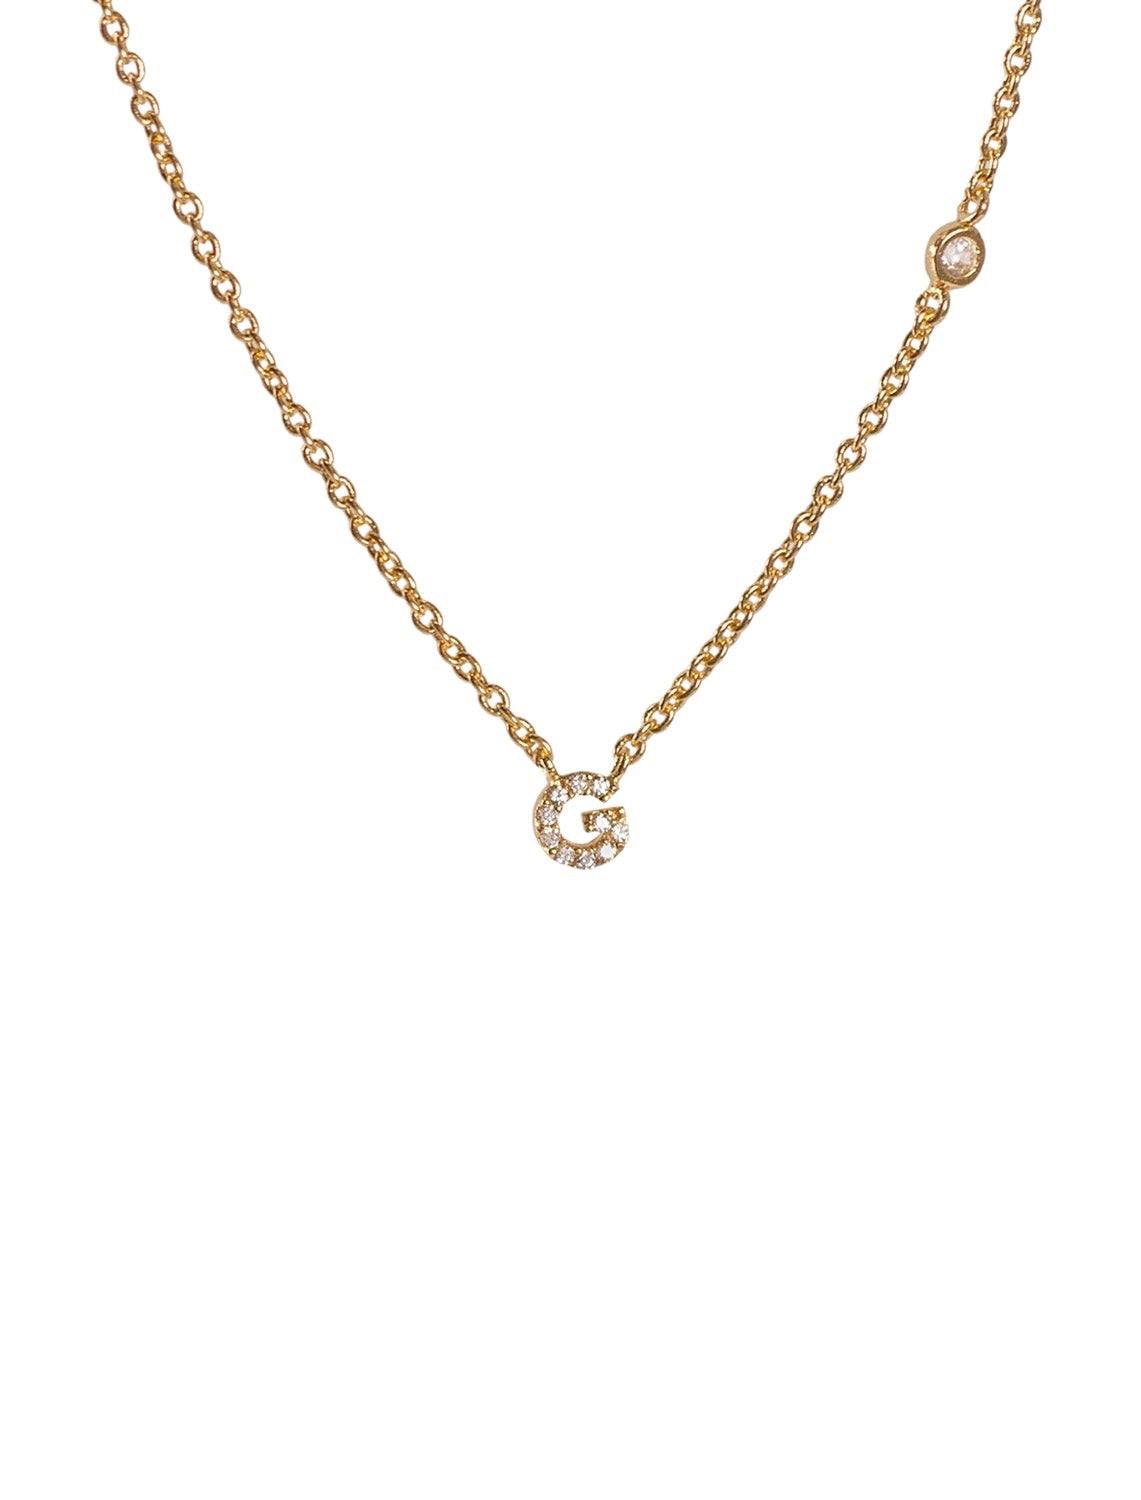 Buy Gold G Necklace Online In India - Etsy India